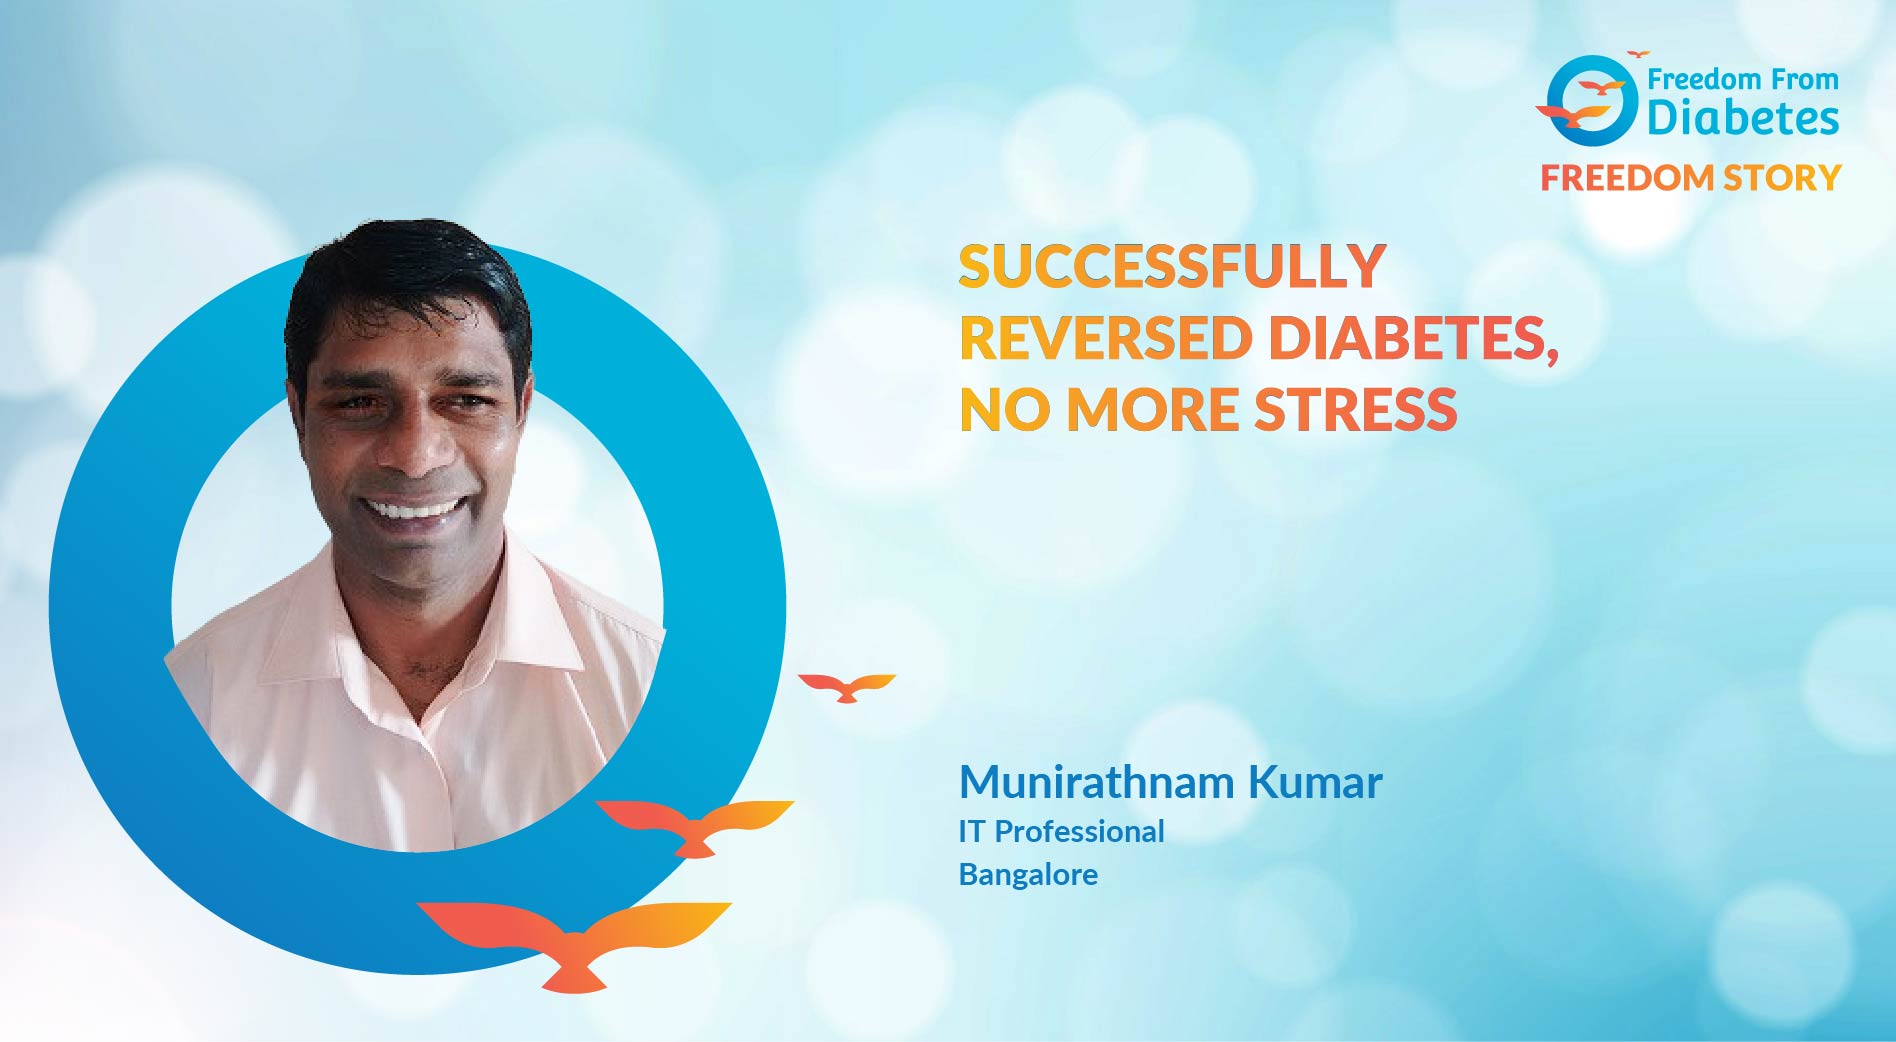 An IT Professional's diabetes success story from Bangalore